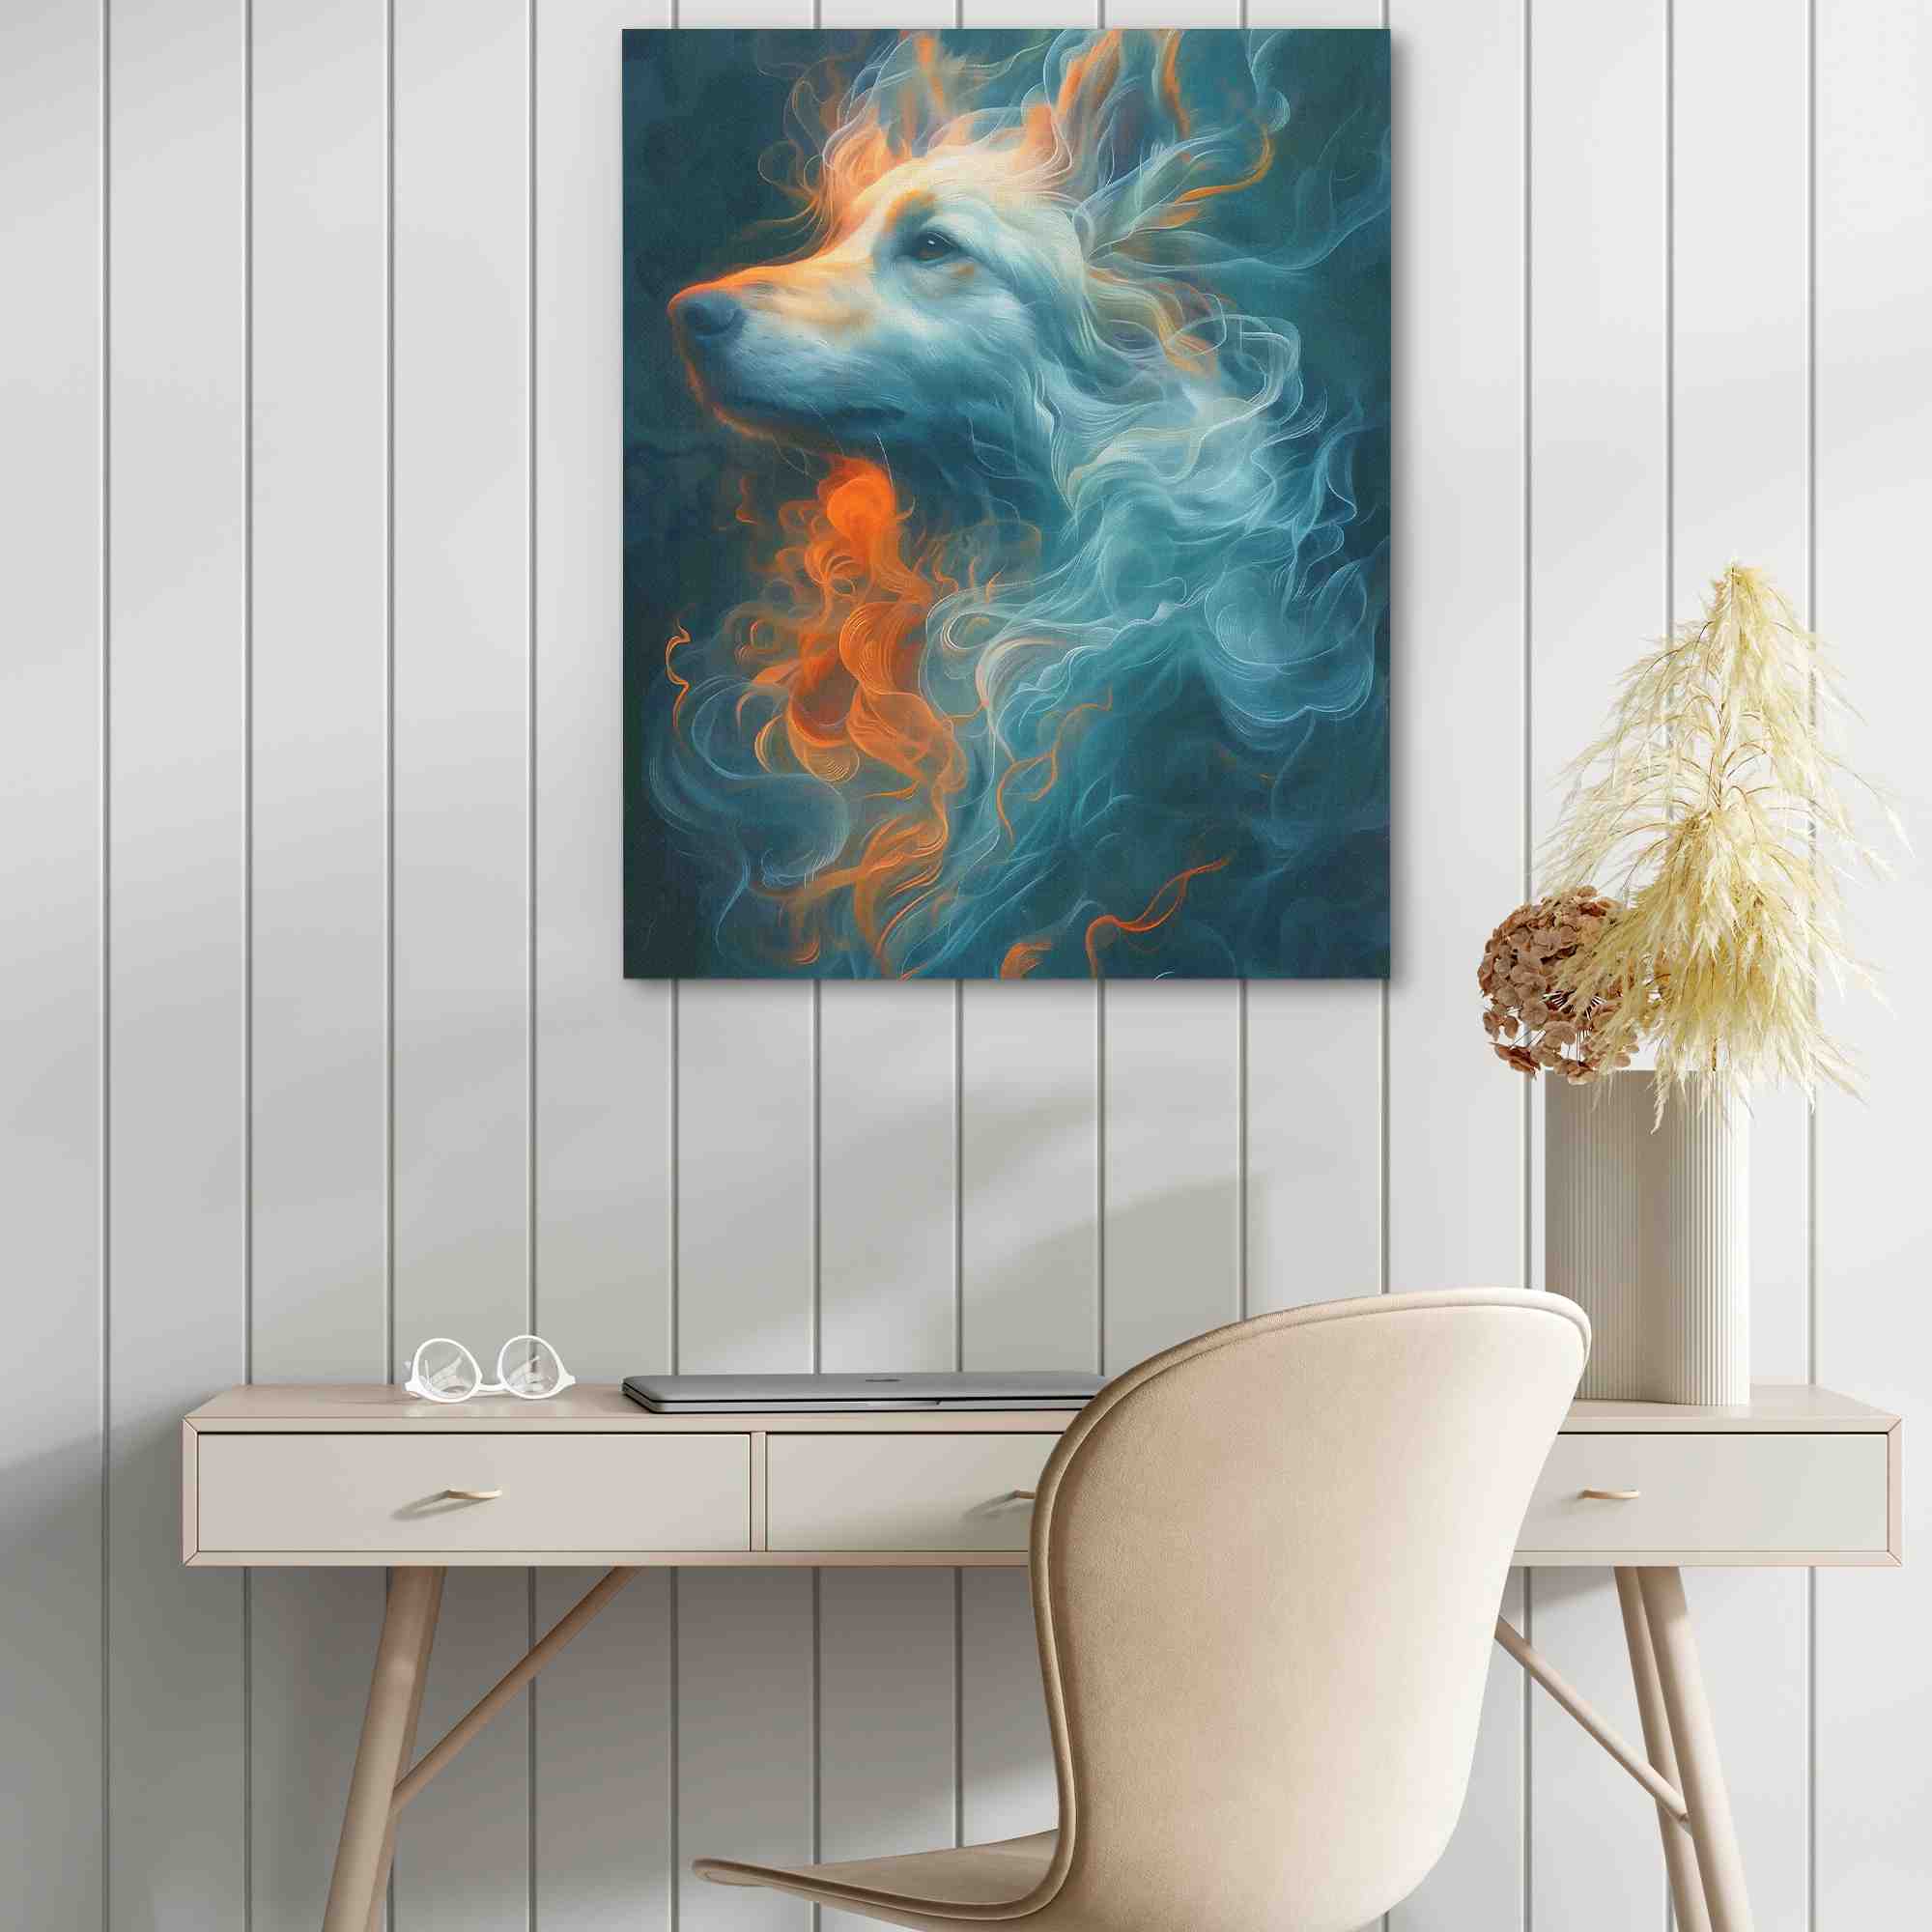 a painting of a white dog with orange and blue swirls